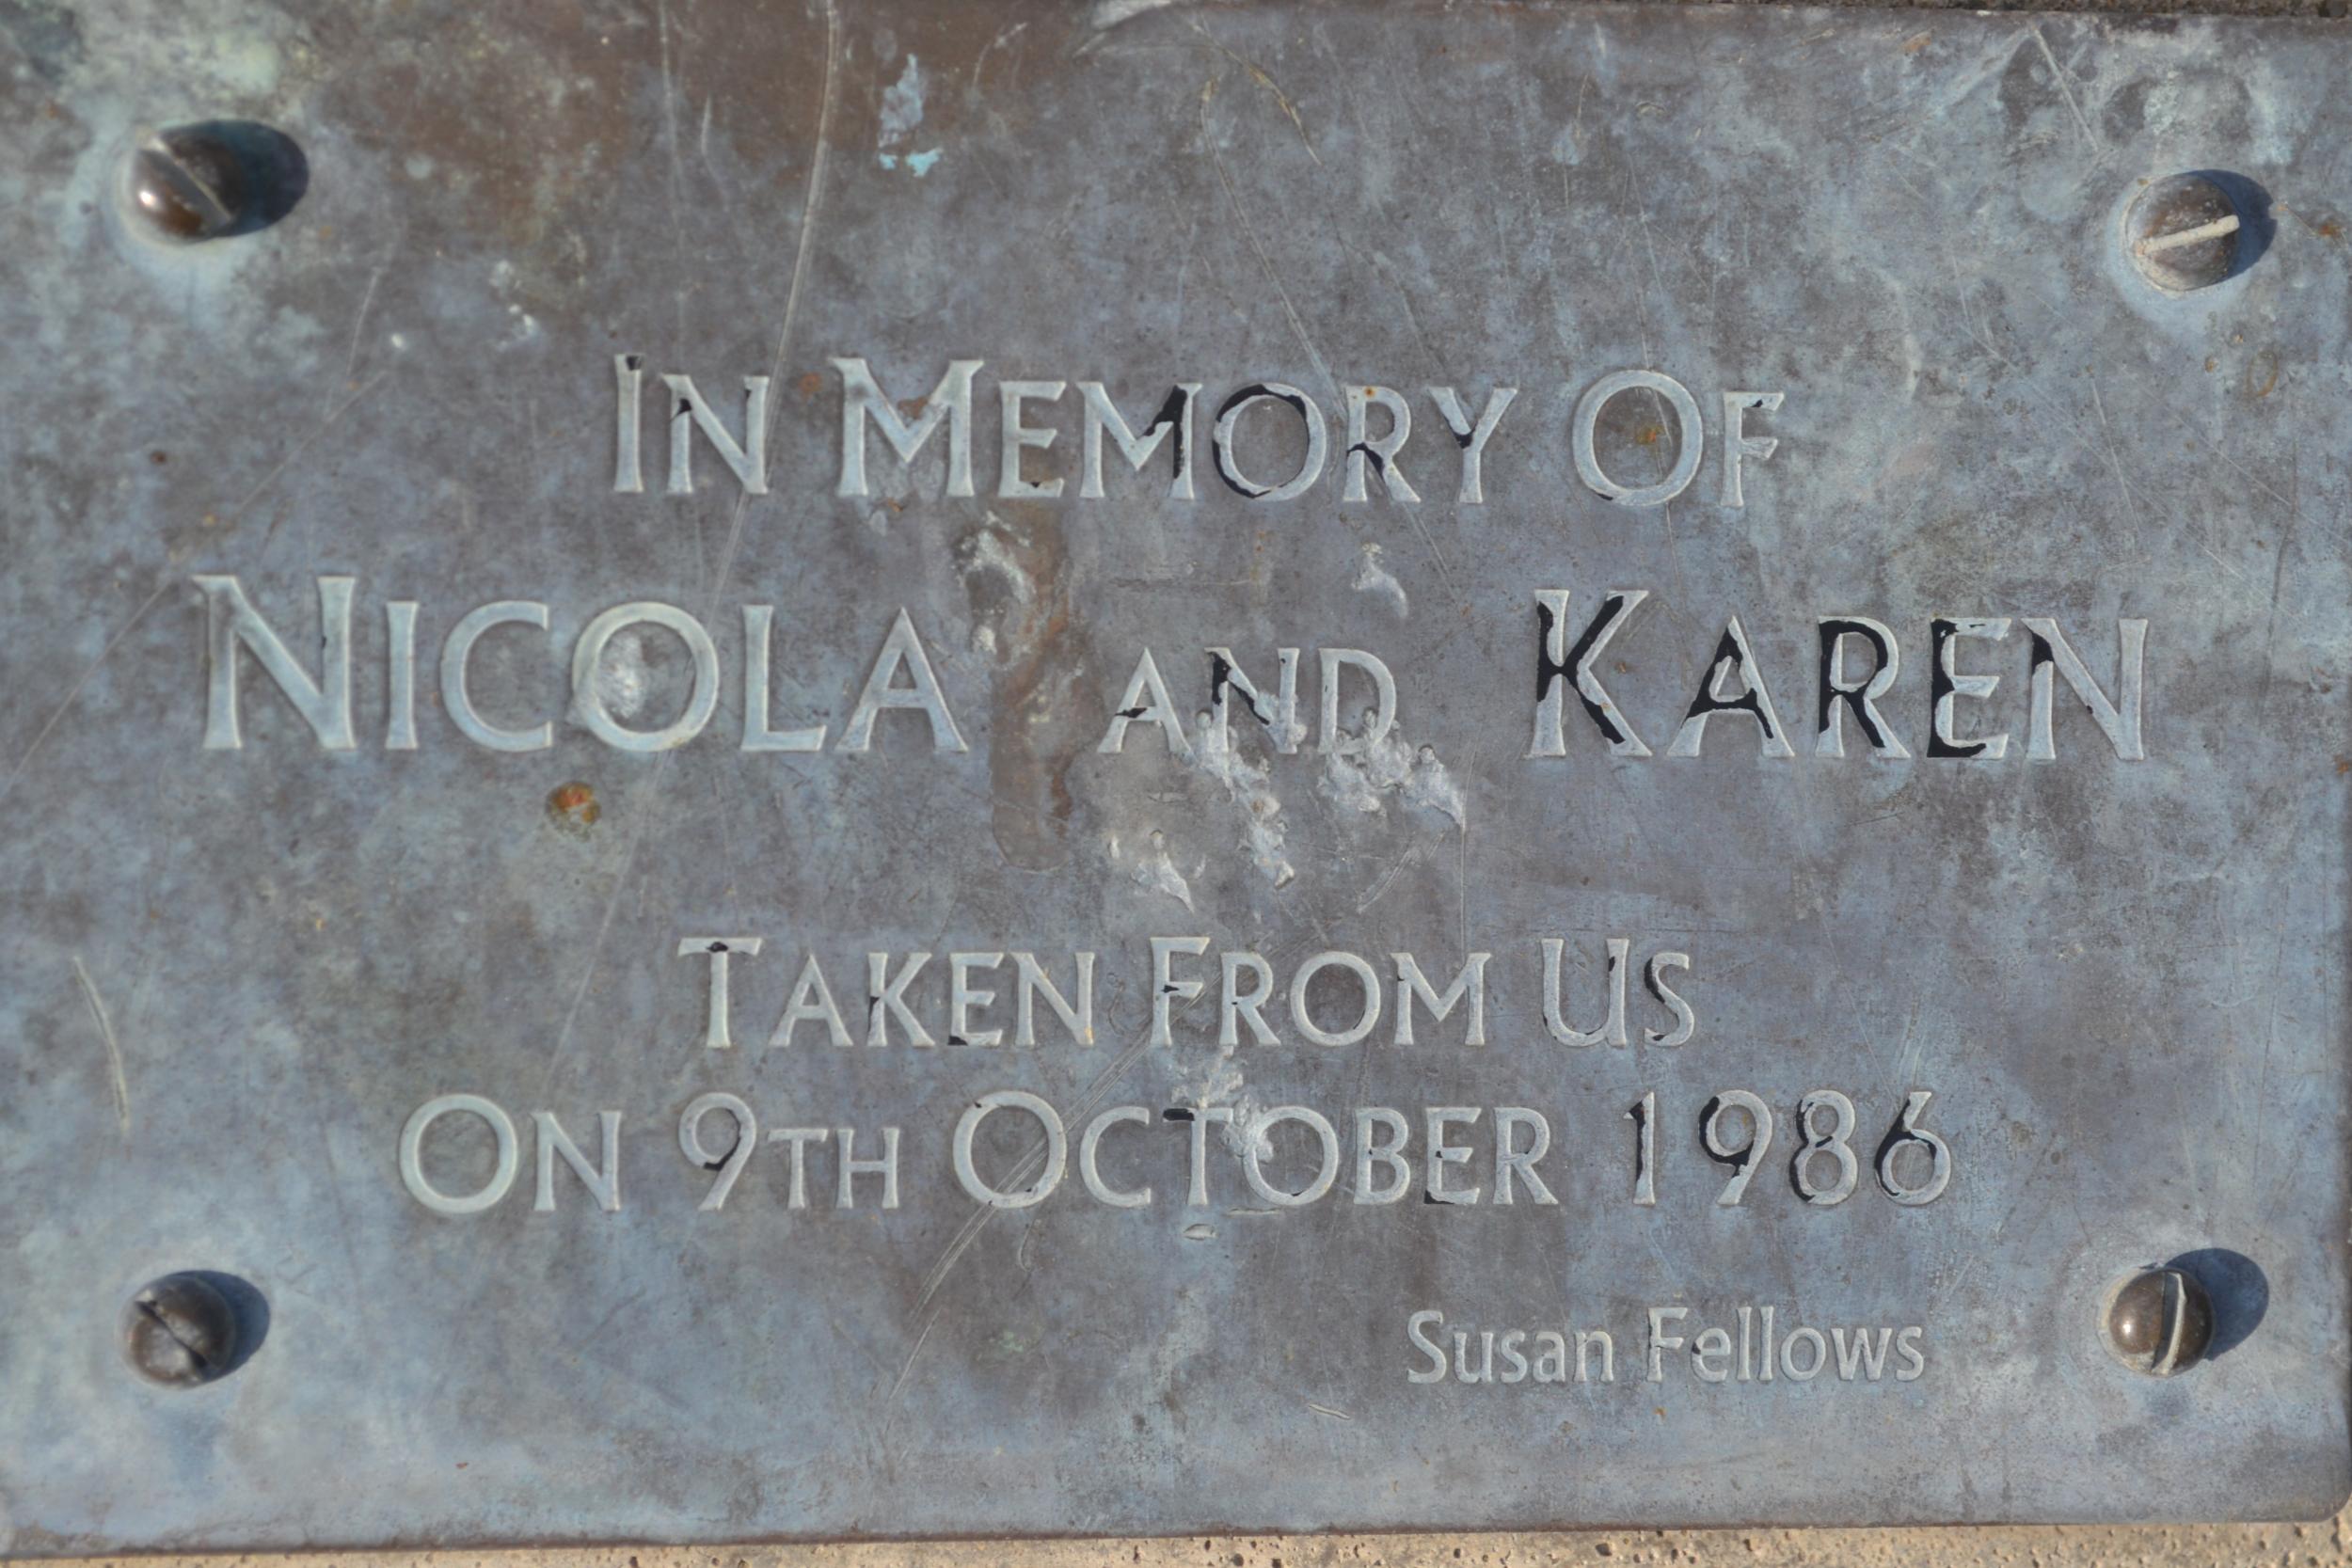 One of the memorial plaques laid in Wild Park by the families